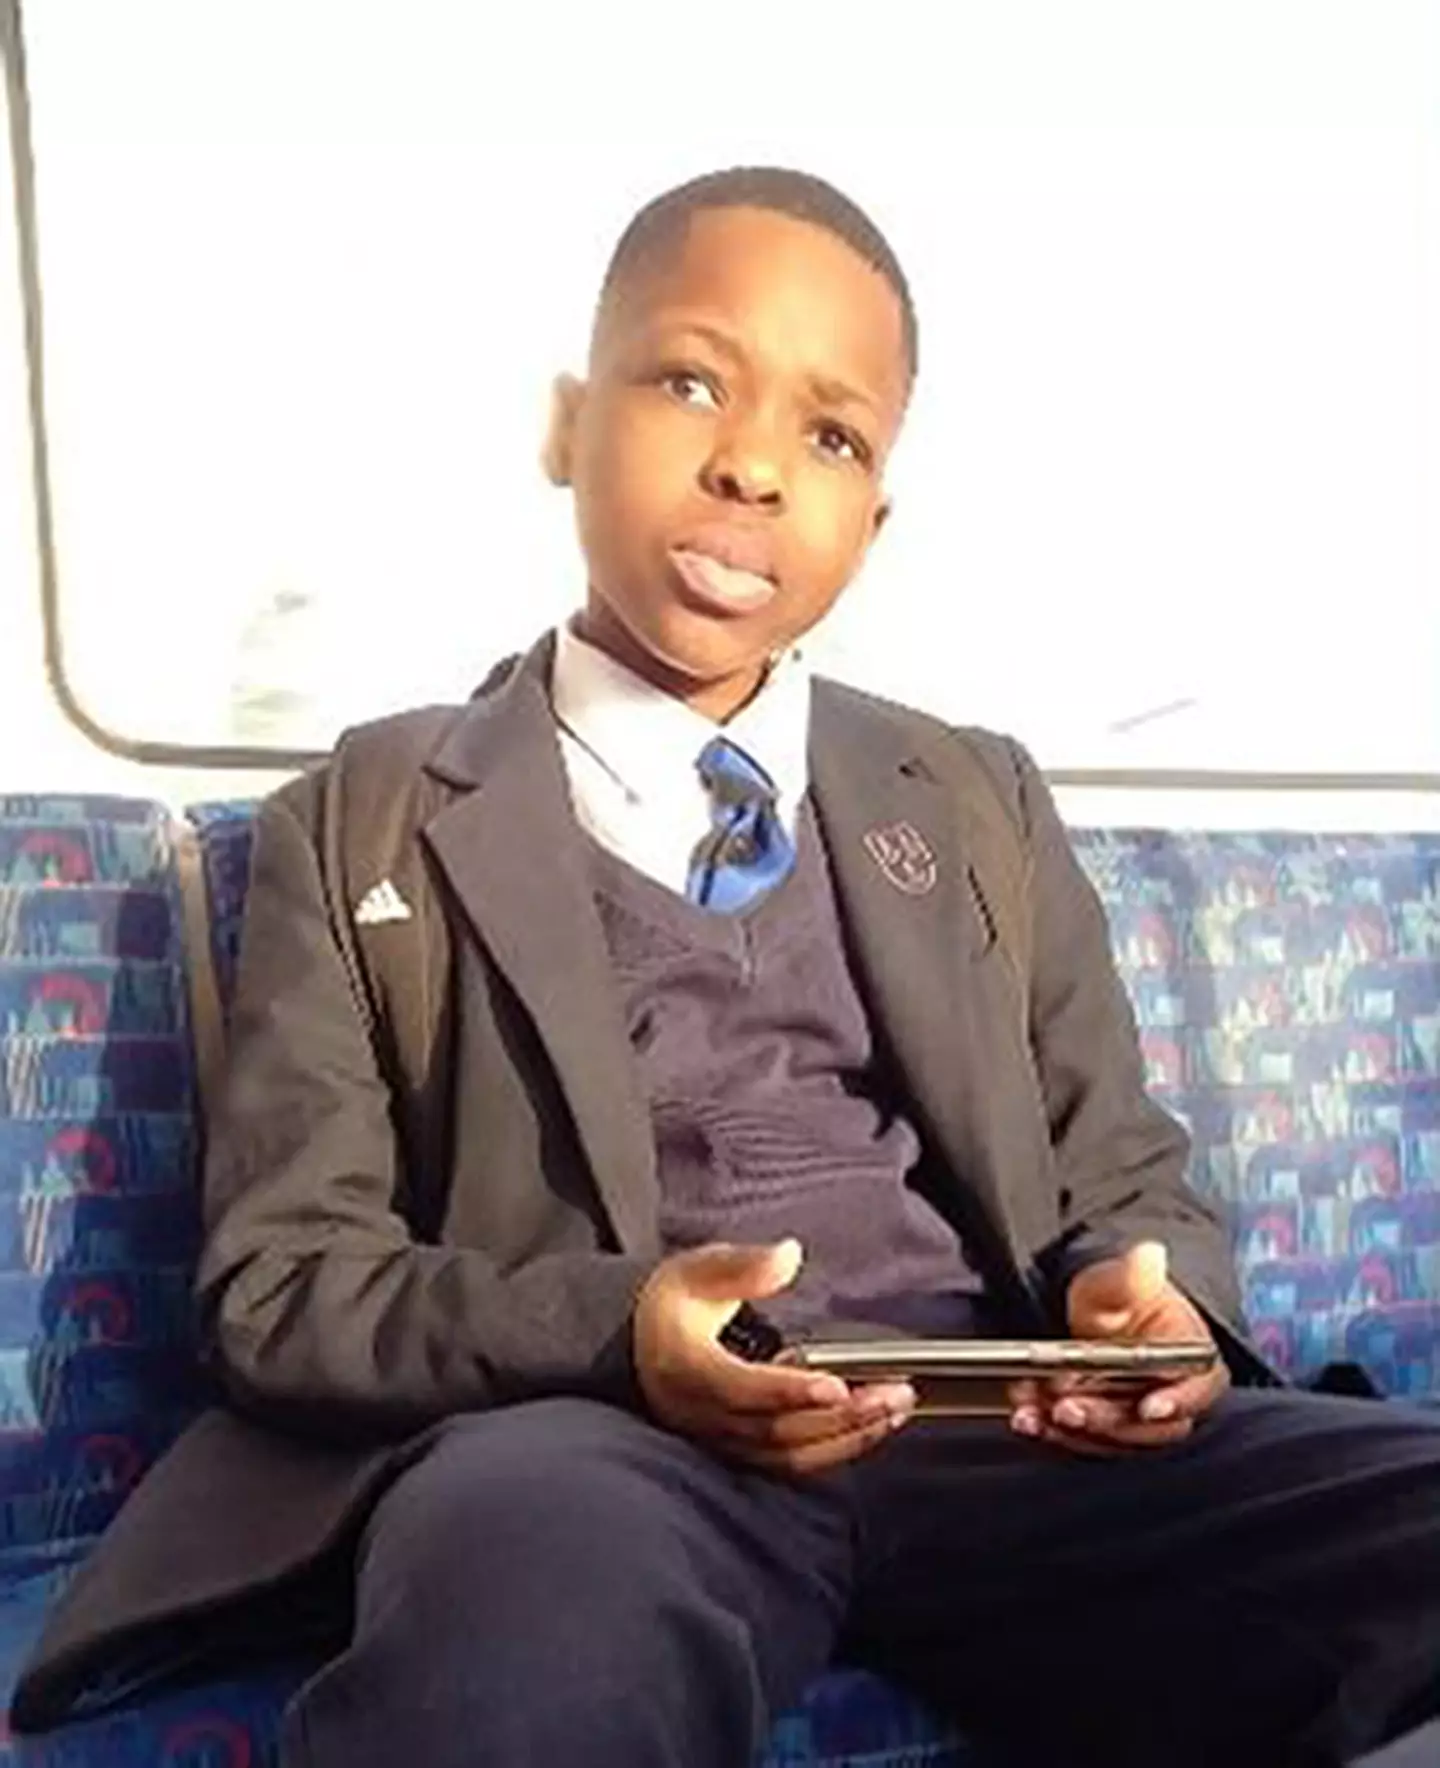 Daniel Anjorin, 14, was tragically killed in the London sword attack. (PA)